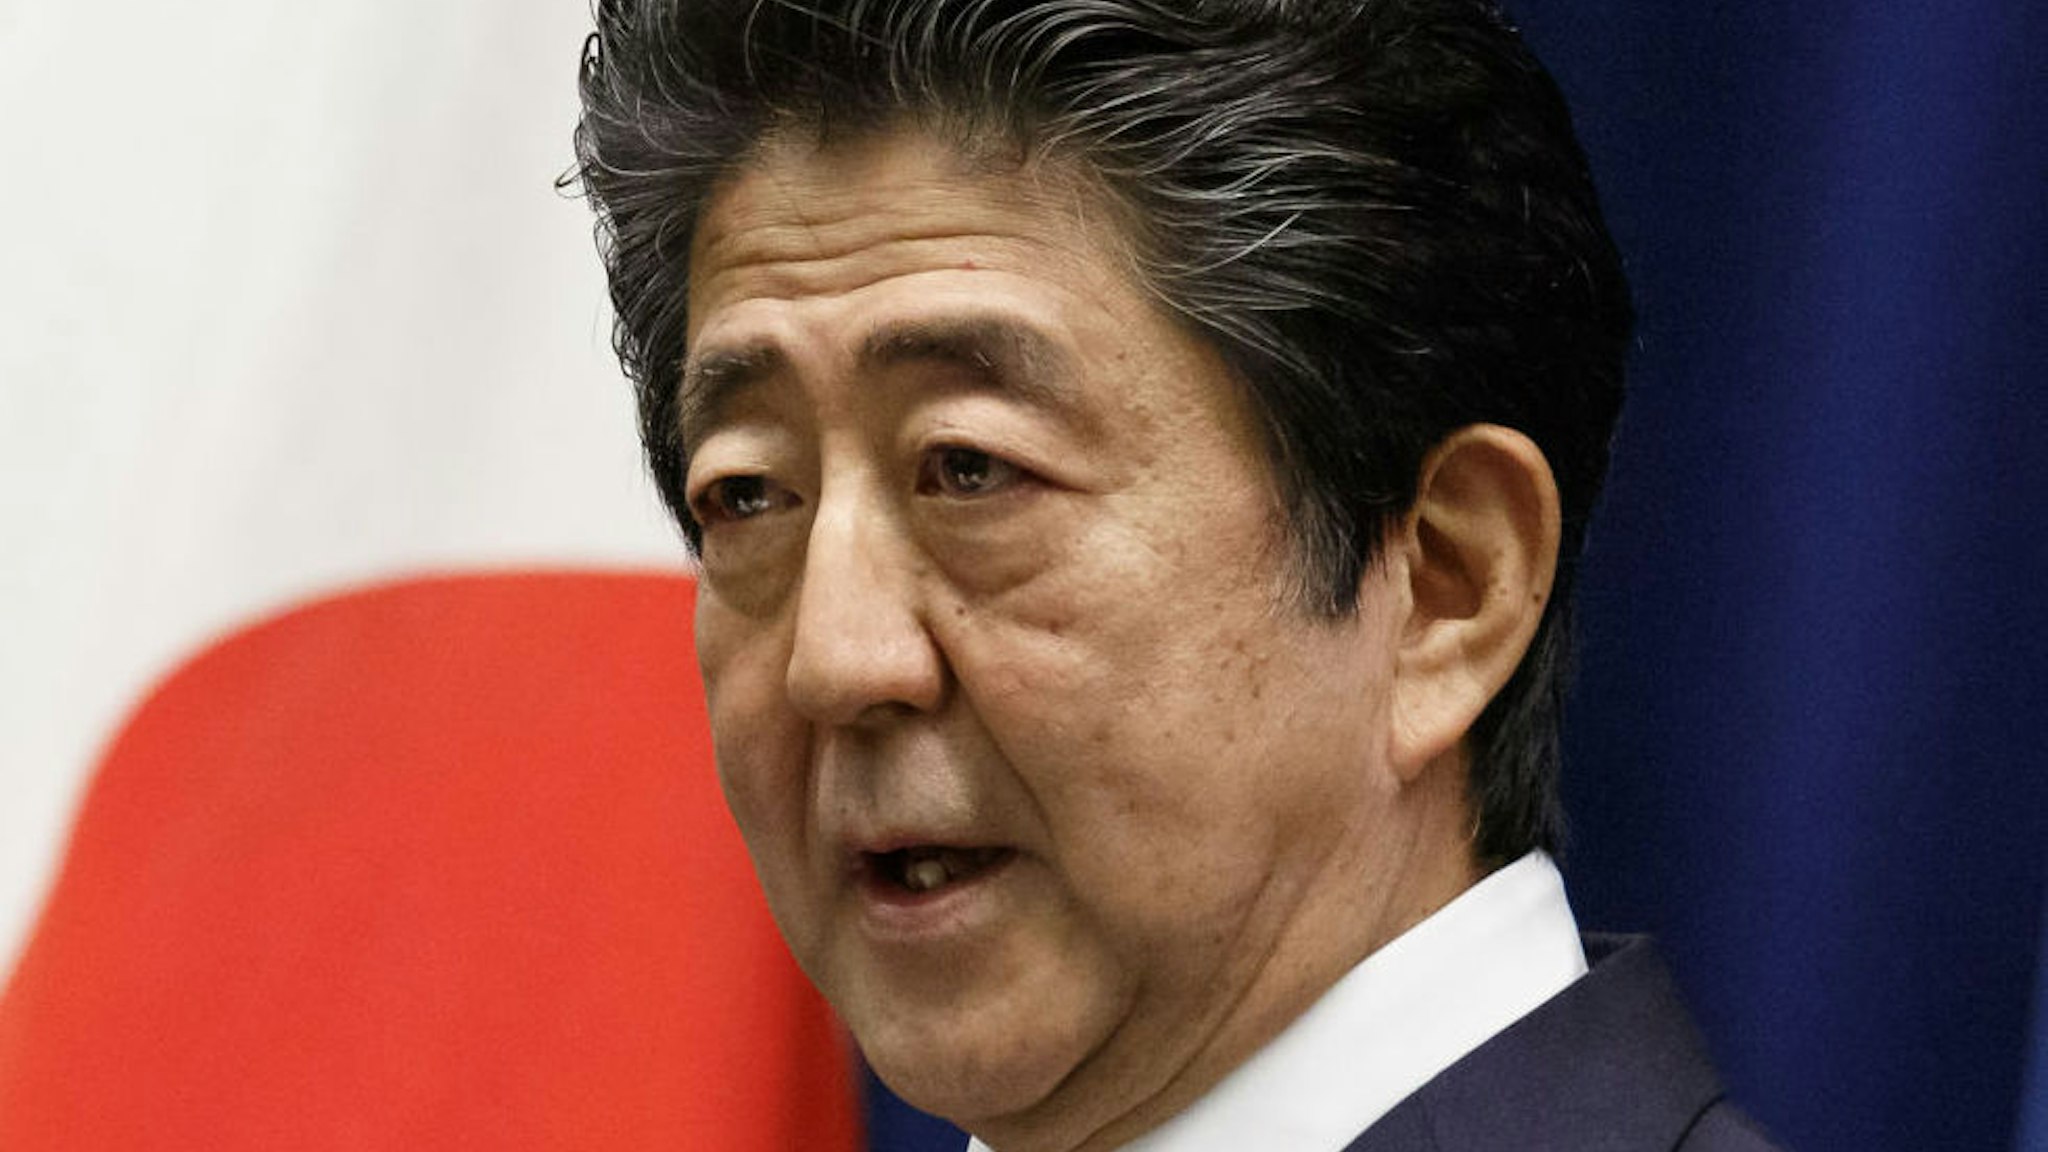 Shinzo Abe, Japan's prime minister, speaks during a news conference in Tokyo, Japan, on Thursday, June 18, 2020. The Japanese government will lift all domestic travel restrictions Friday as it looks to move into the next phase of reopening, including a restart of events and nightlife.